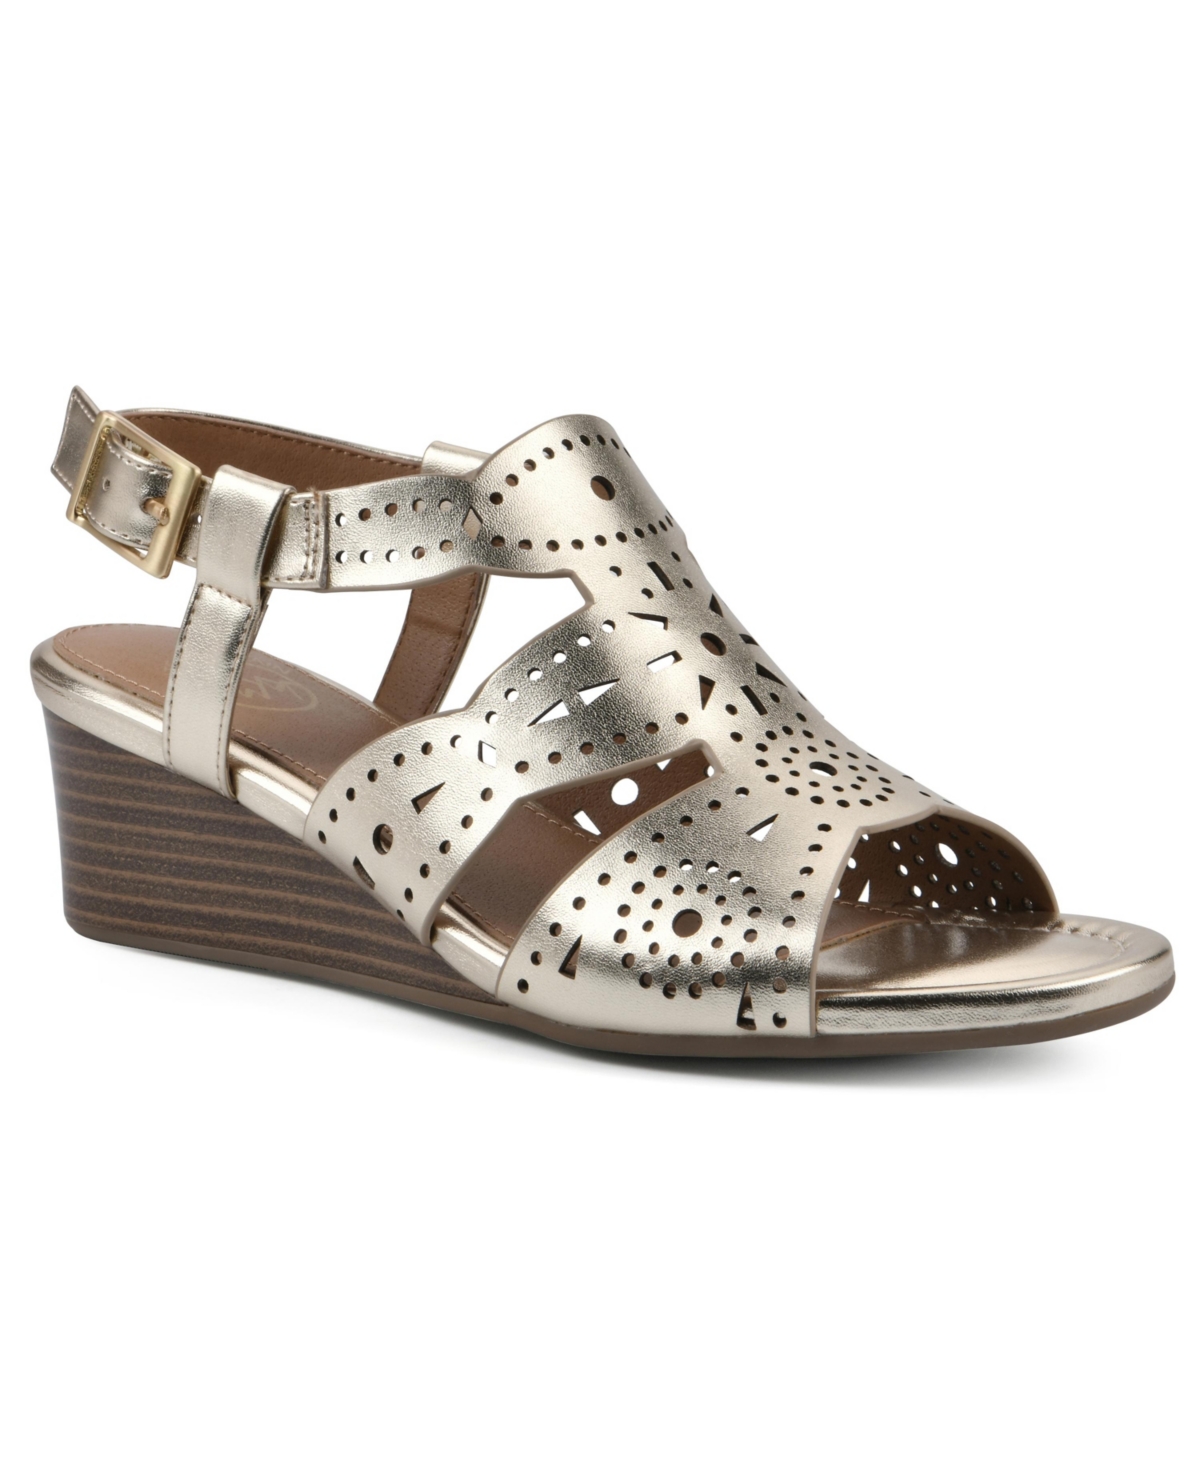 Women's Brush Up Perforated Wedge Sandals - Gold Metallic Smooth